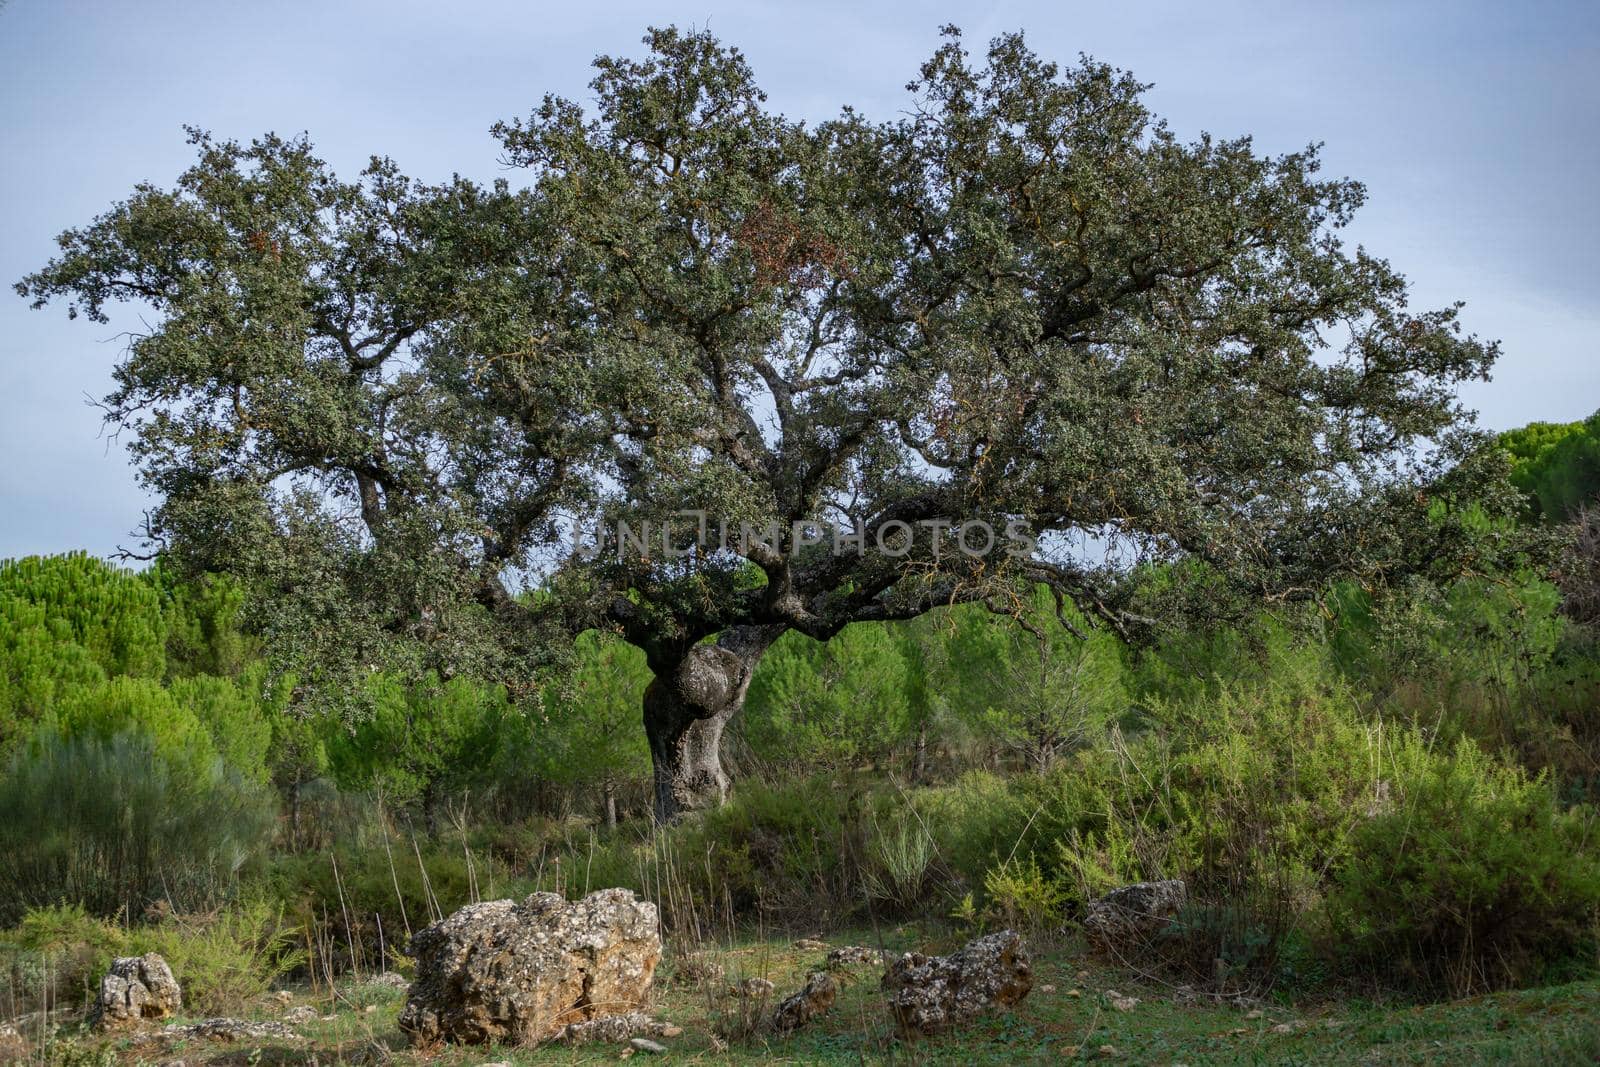 holm oak or Quercus ilex in the foreground with cloudy sky in the background and copy space